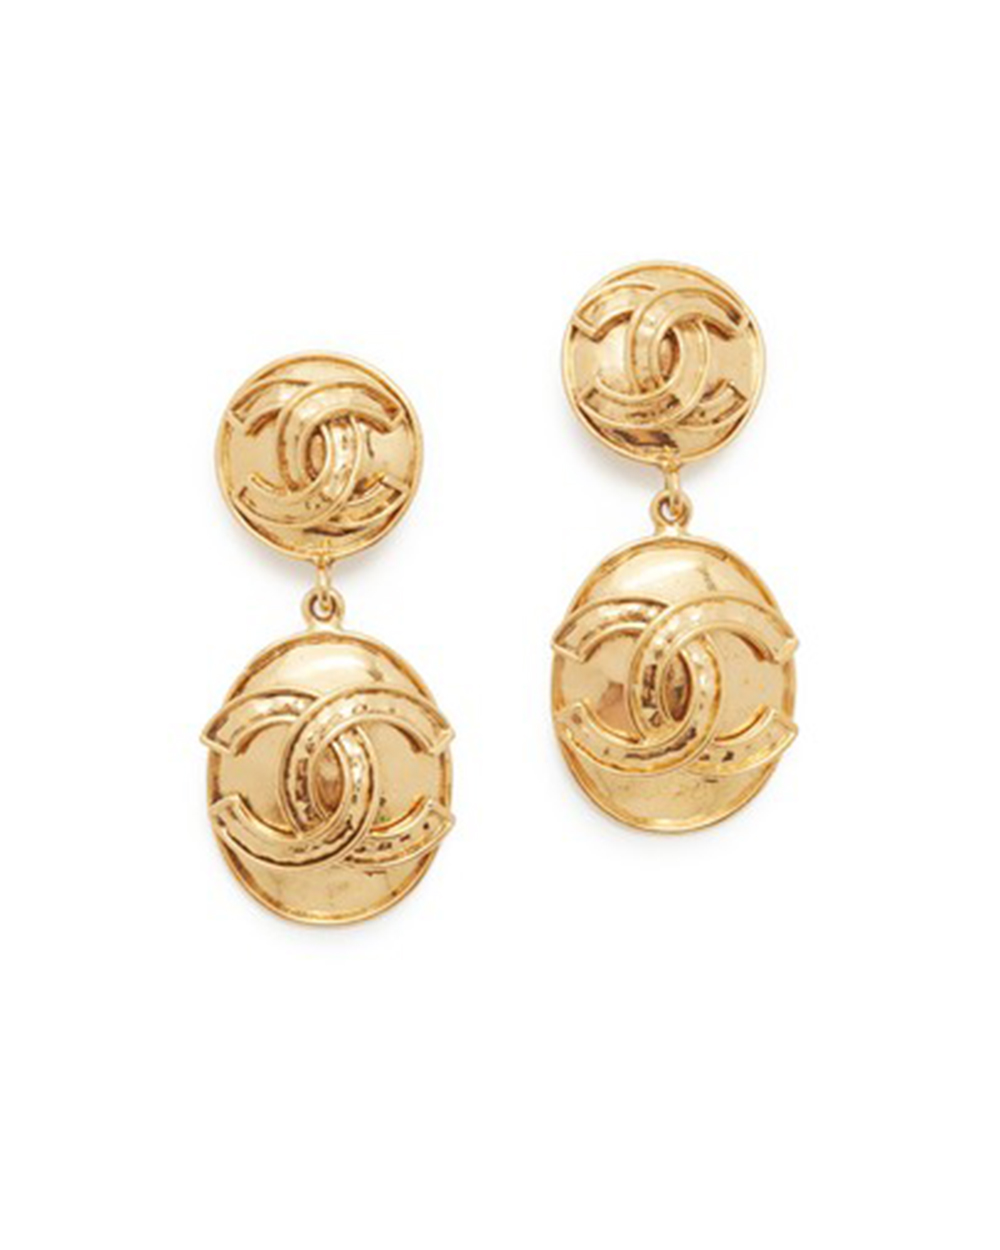 Vintage Chanel earrings from, What goes around comes around, $1,640, from Shopbop